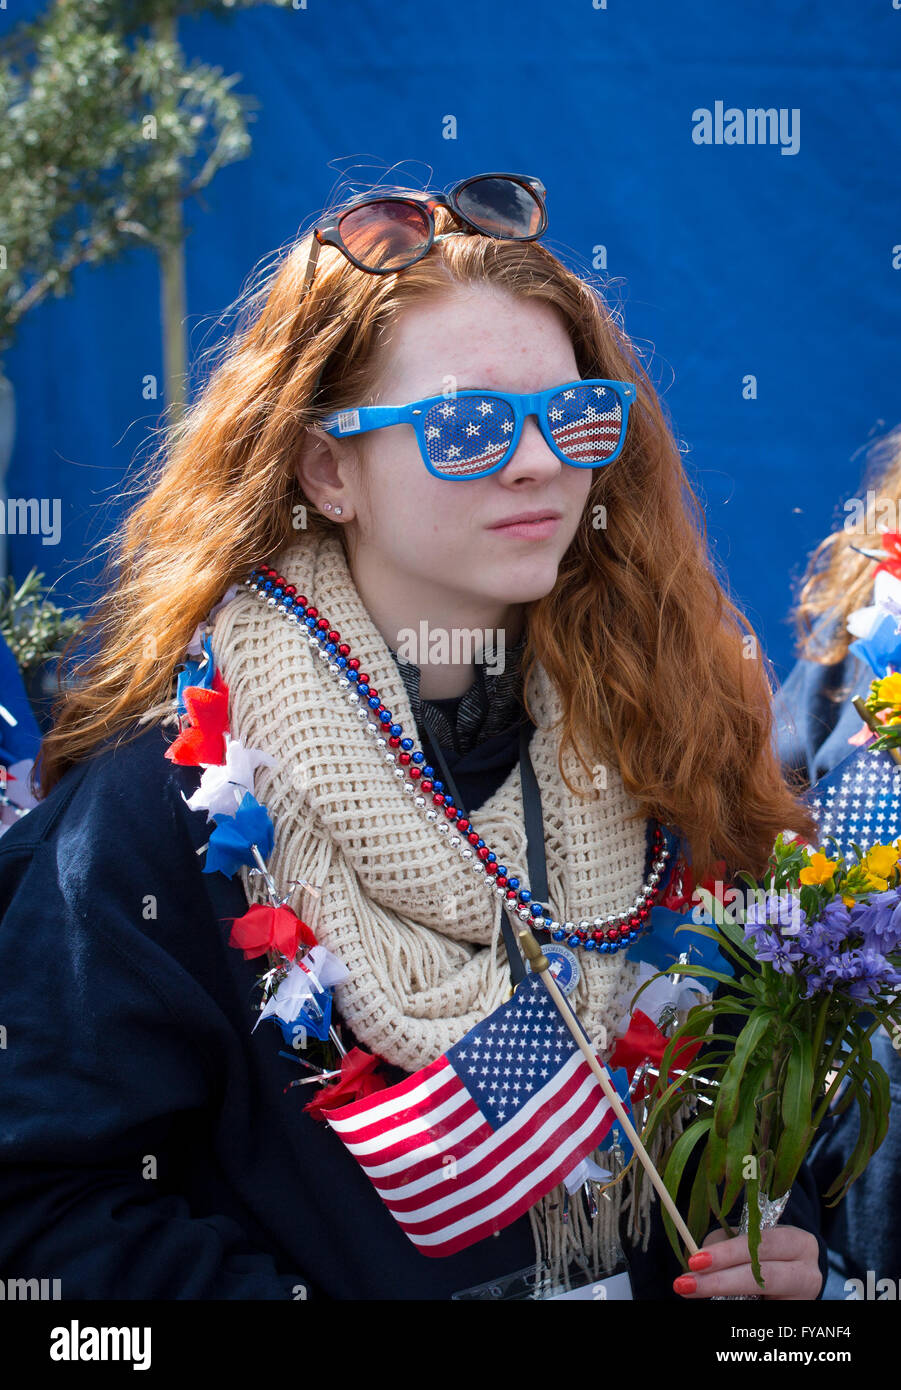 A young American girl dressed in stars and stripes paraphernalia Stock Photo